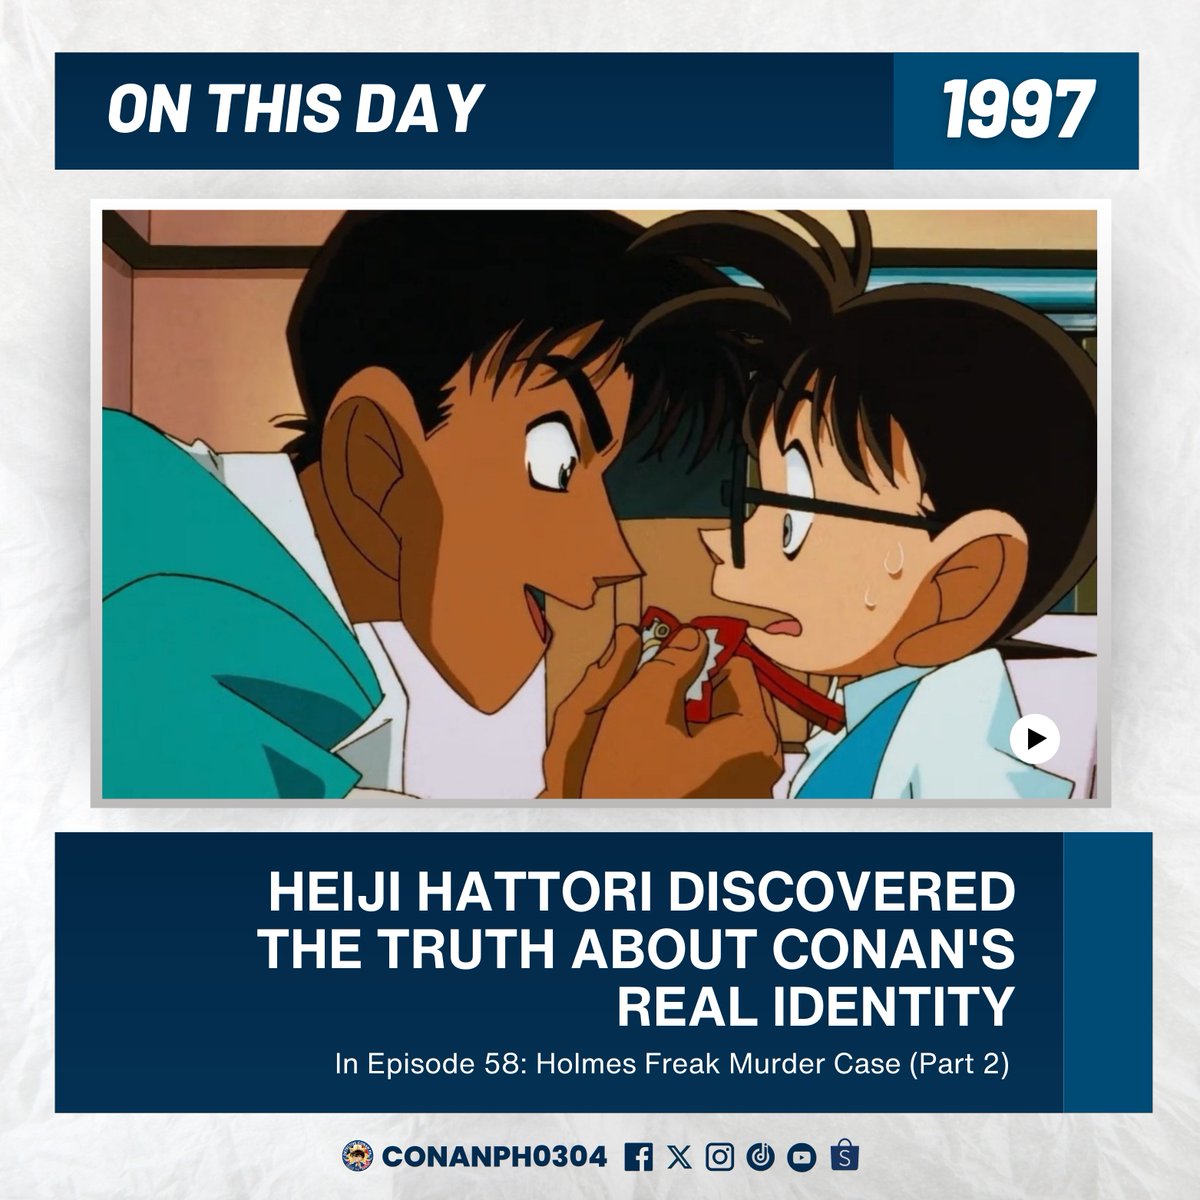 ON THIS DAY | Today marks the 27th anniversary since Heiji Hattori discovered the truth abouth Conan Edogawa's real identity.
#dcphanimeandmanga